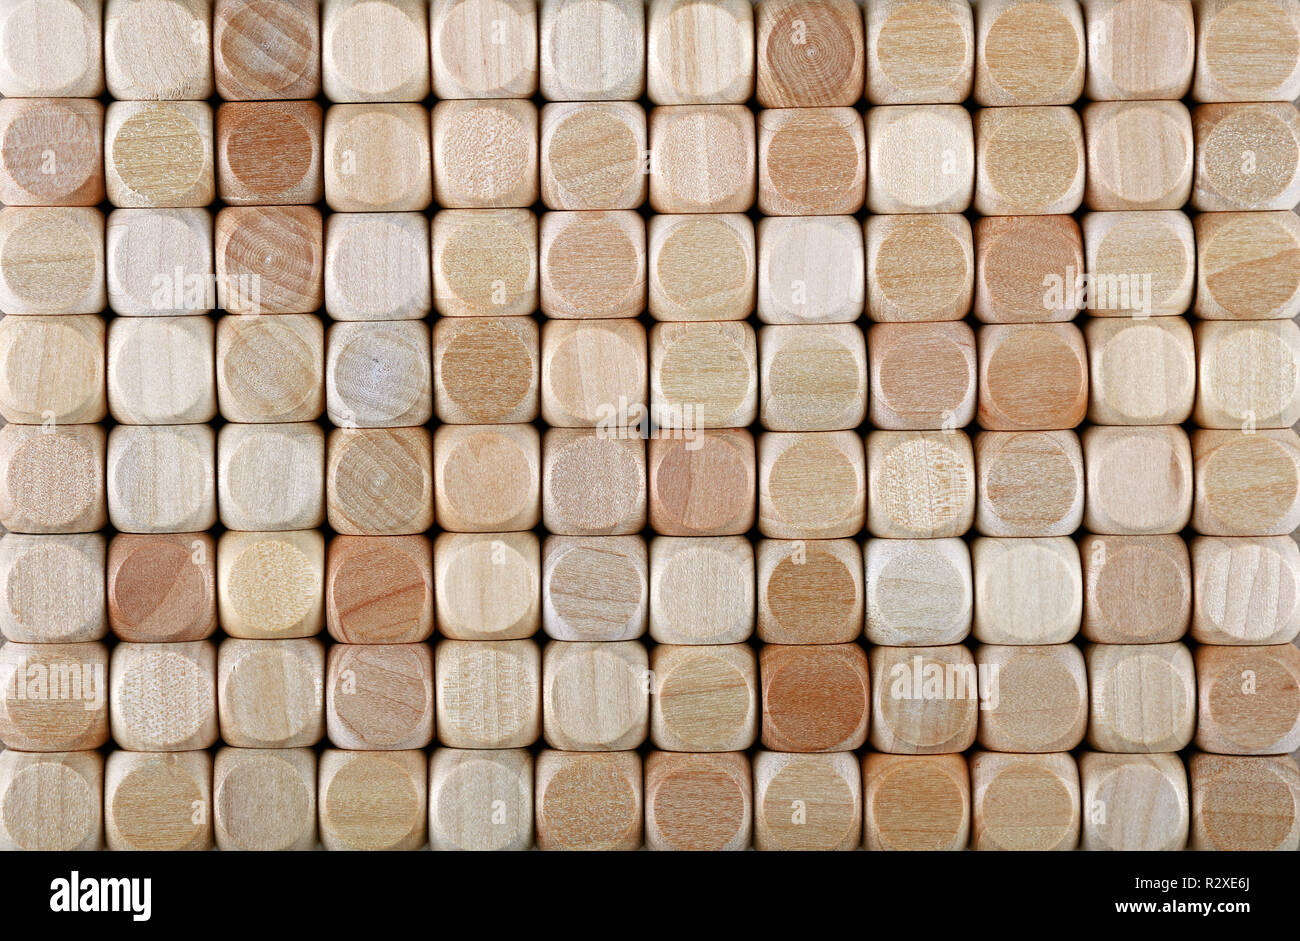 Close up background pattern of natural wooden dice shaped toy building blocks, elevated high angle view, directly above Stock Photo